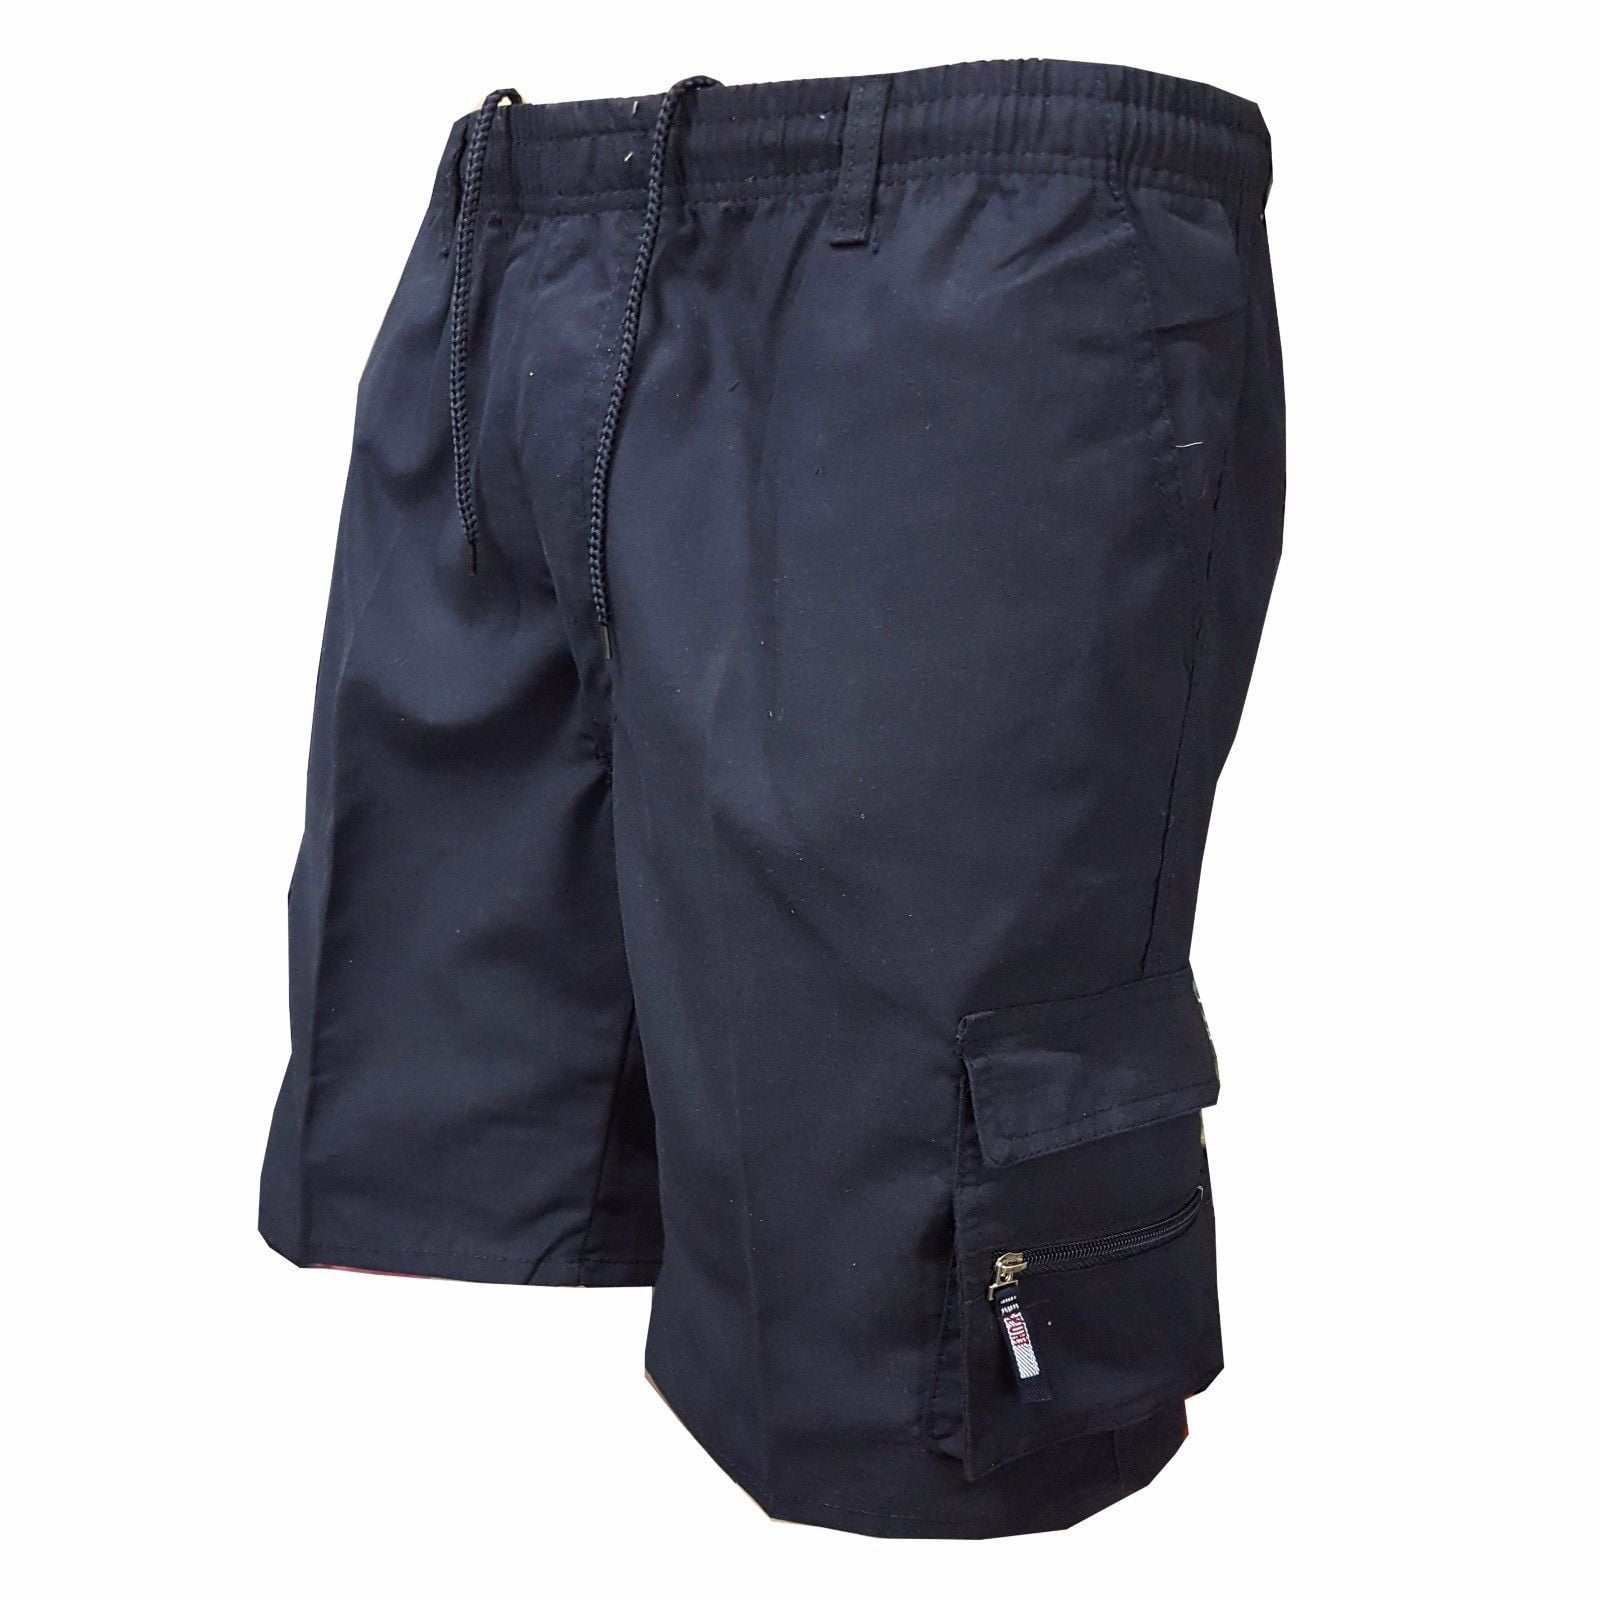 Mens Portwest S790 Combat Cargo Workwear Shorts with pockets 